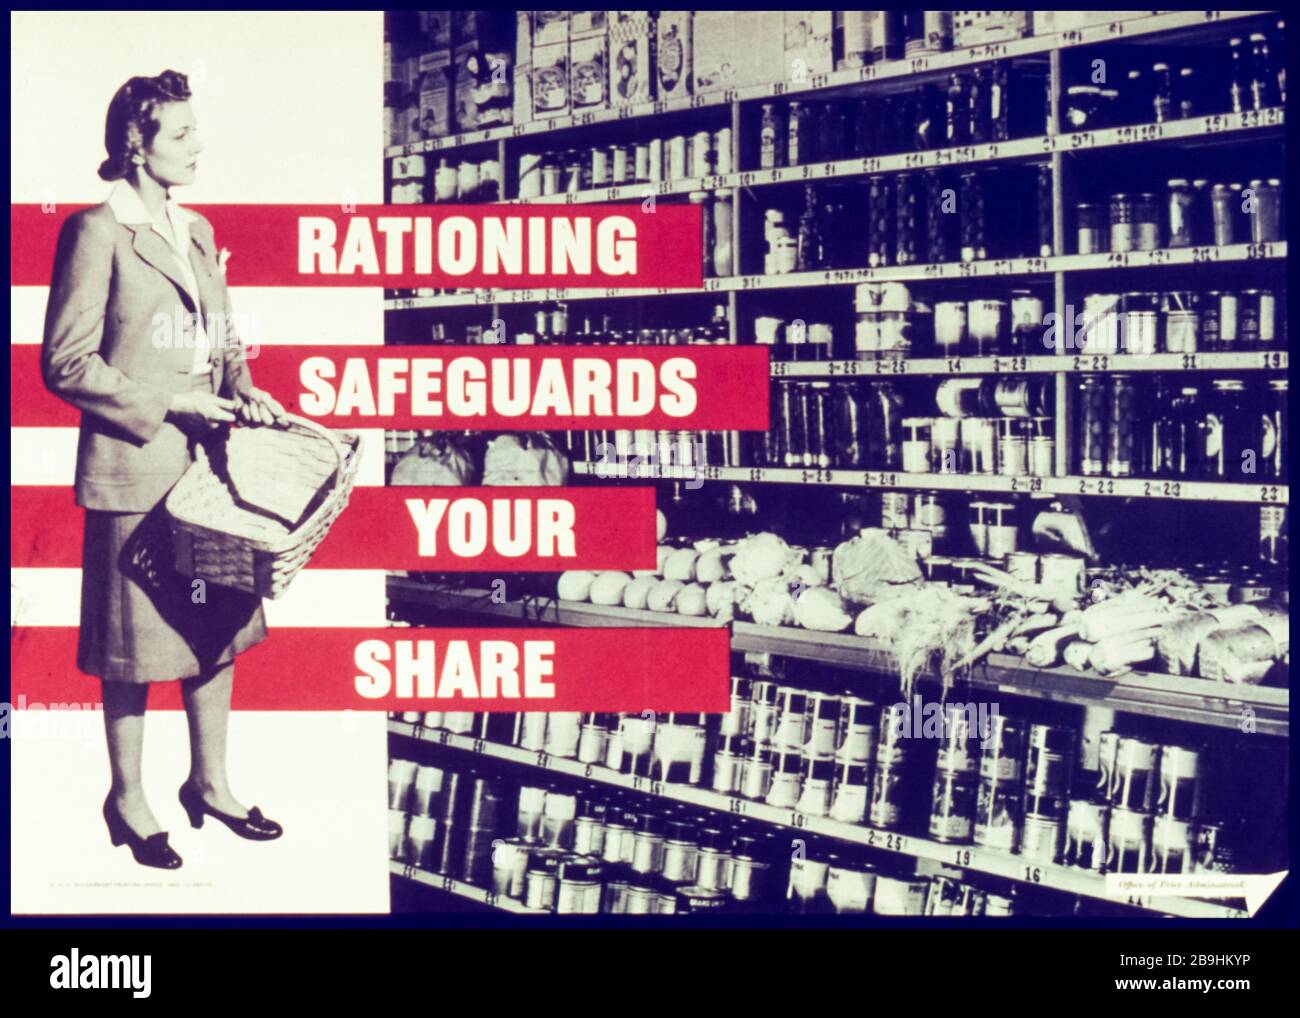 US WW2 Food rationing campaign poster, Rationing safeguards your share, 1941-1945 Stock Photo